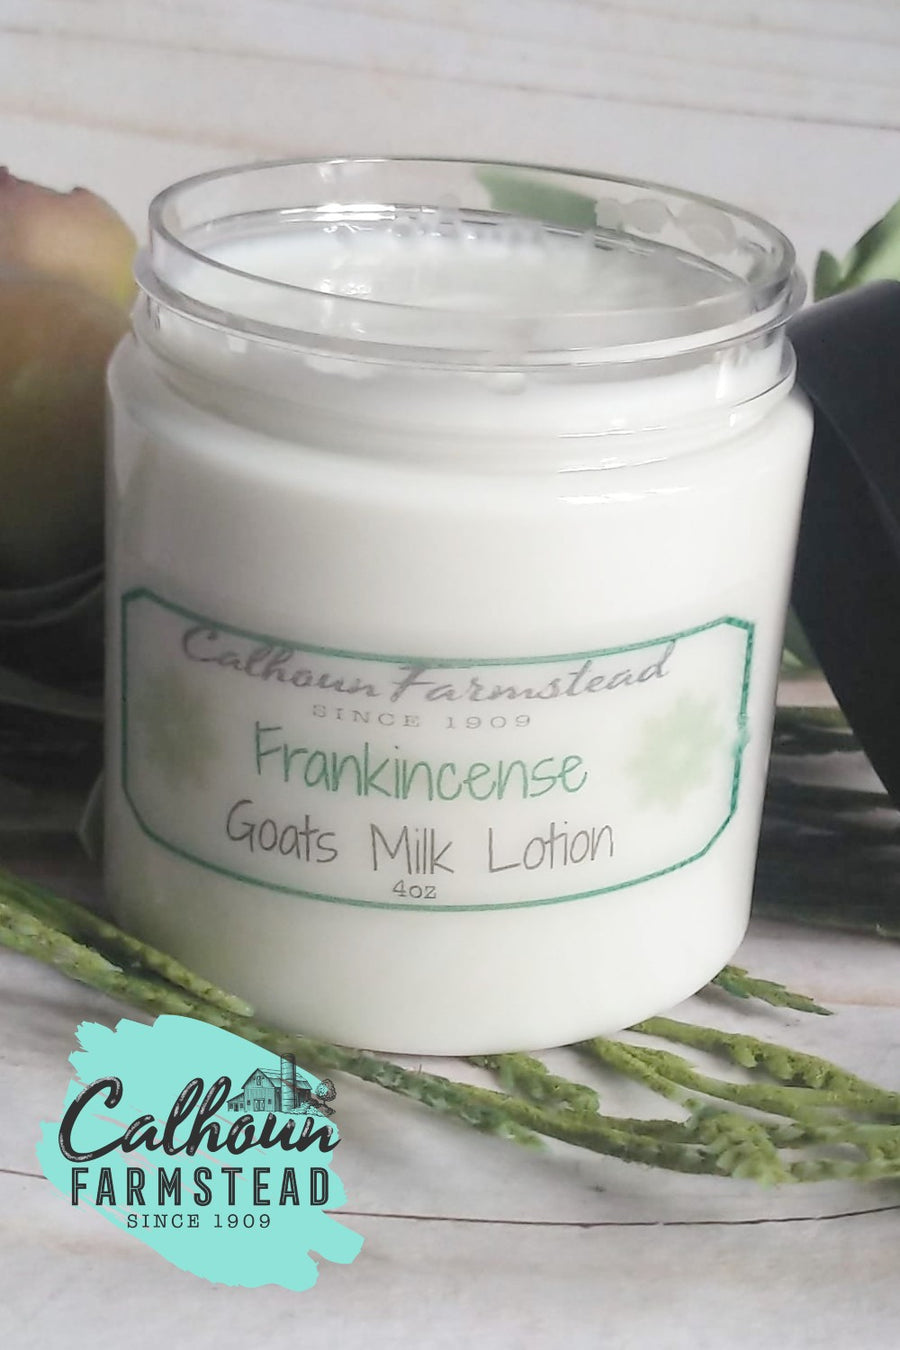 Frankincense goats milk lotion. made with natural ingredients by Calhoun Farm. Scented with essential oils.